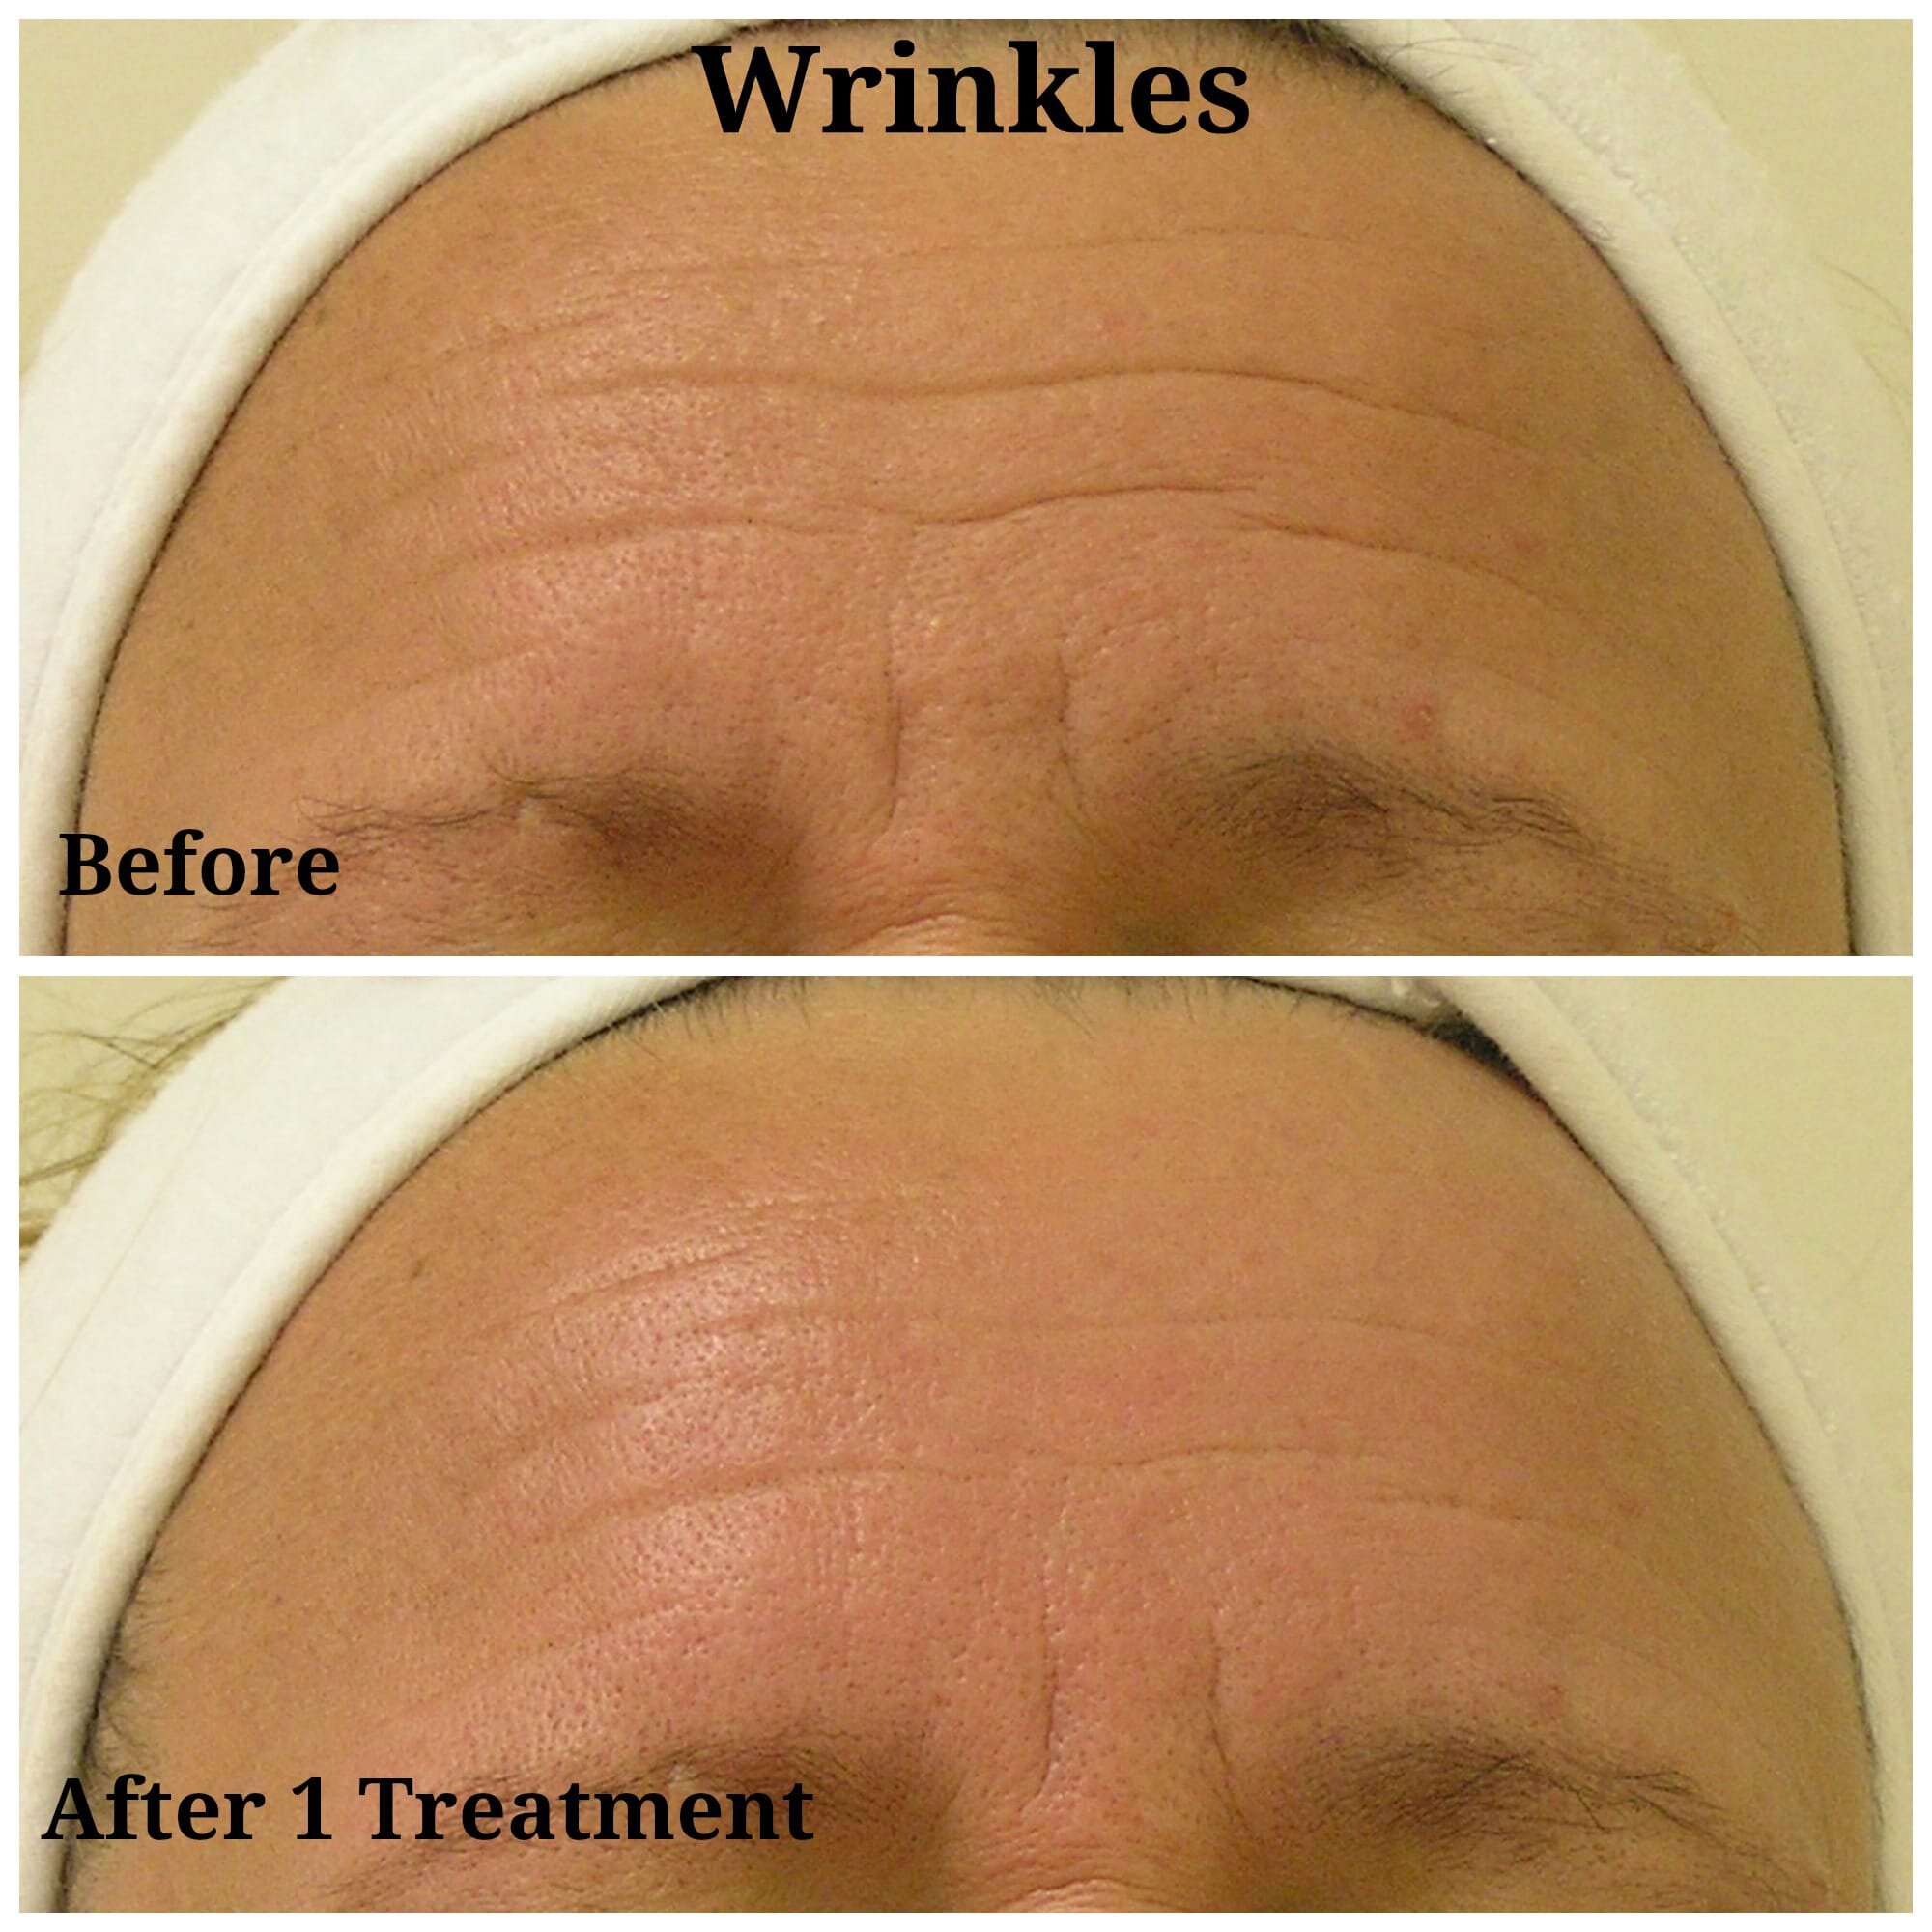 Newtown Hydrafacial patient for forehead wrinkles treatment before and after